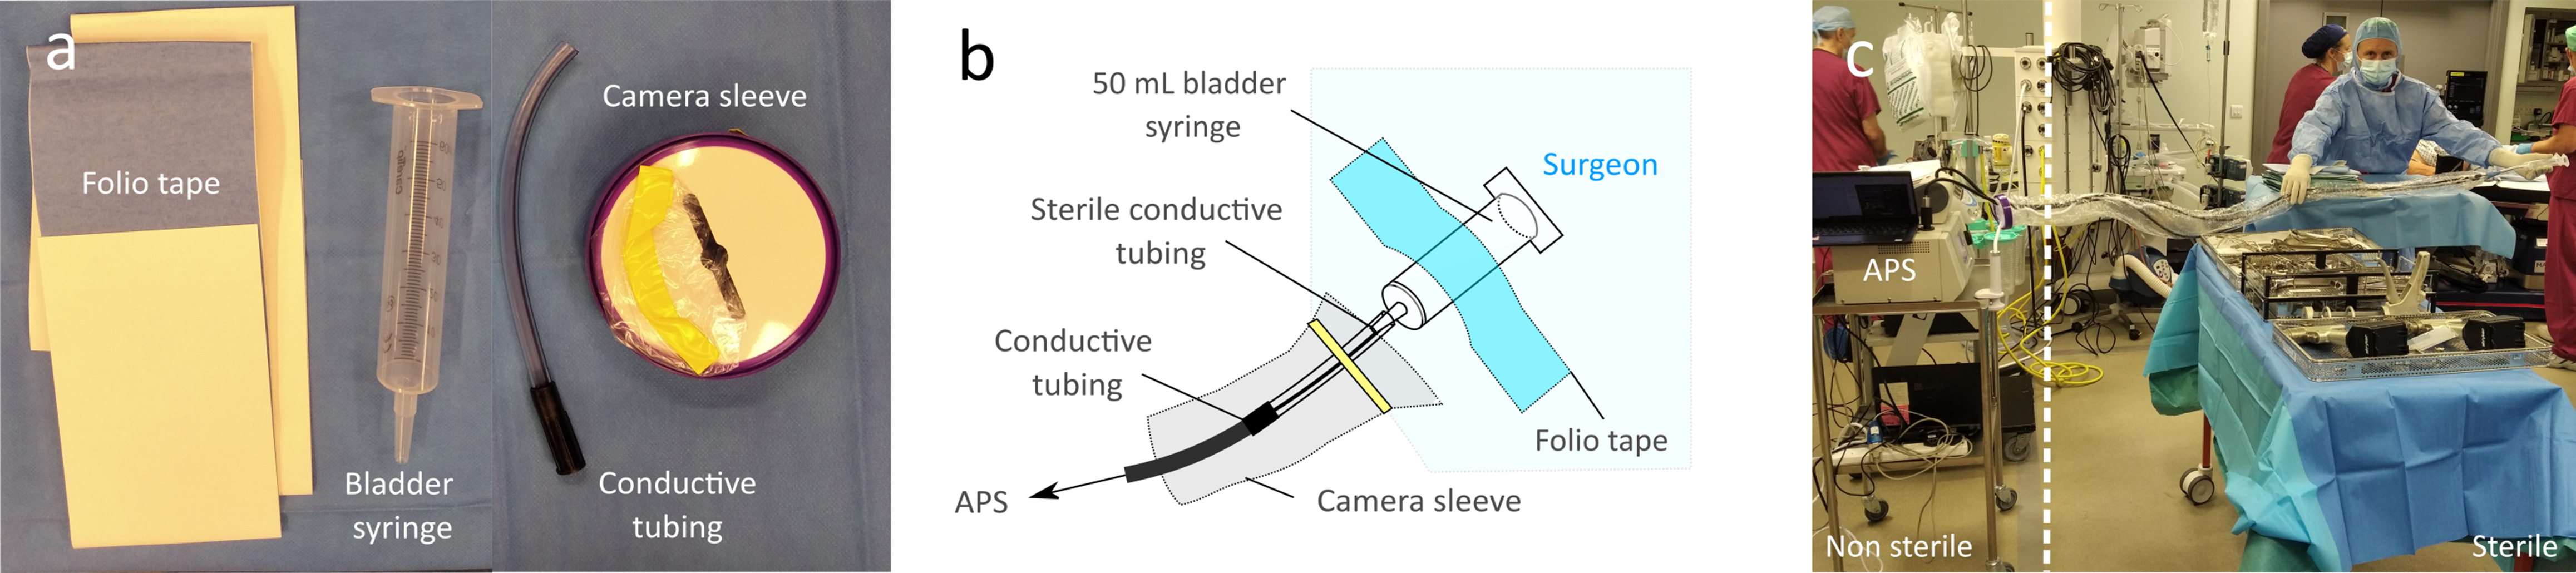 Fig. 1 
            The sterile setup for aerosol detection during surgery. a) Sterile components: folio tape, 50 ml bladder syringe (plunger discarded), 20 cm sterile conductive tubing, and camera sleeve. b) Labelled schematic of assemblage. c) Setup allows an approximately 2 m sterile range with the non-sterile region attaching to the particle detector (Aerodynamic Particle Sizer (APS)) outside of laminar flow region.
          